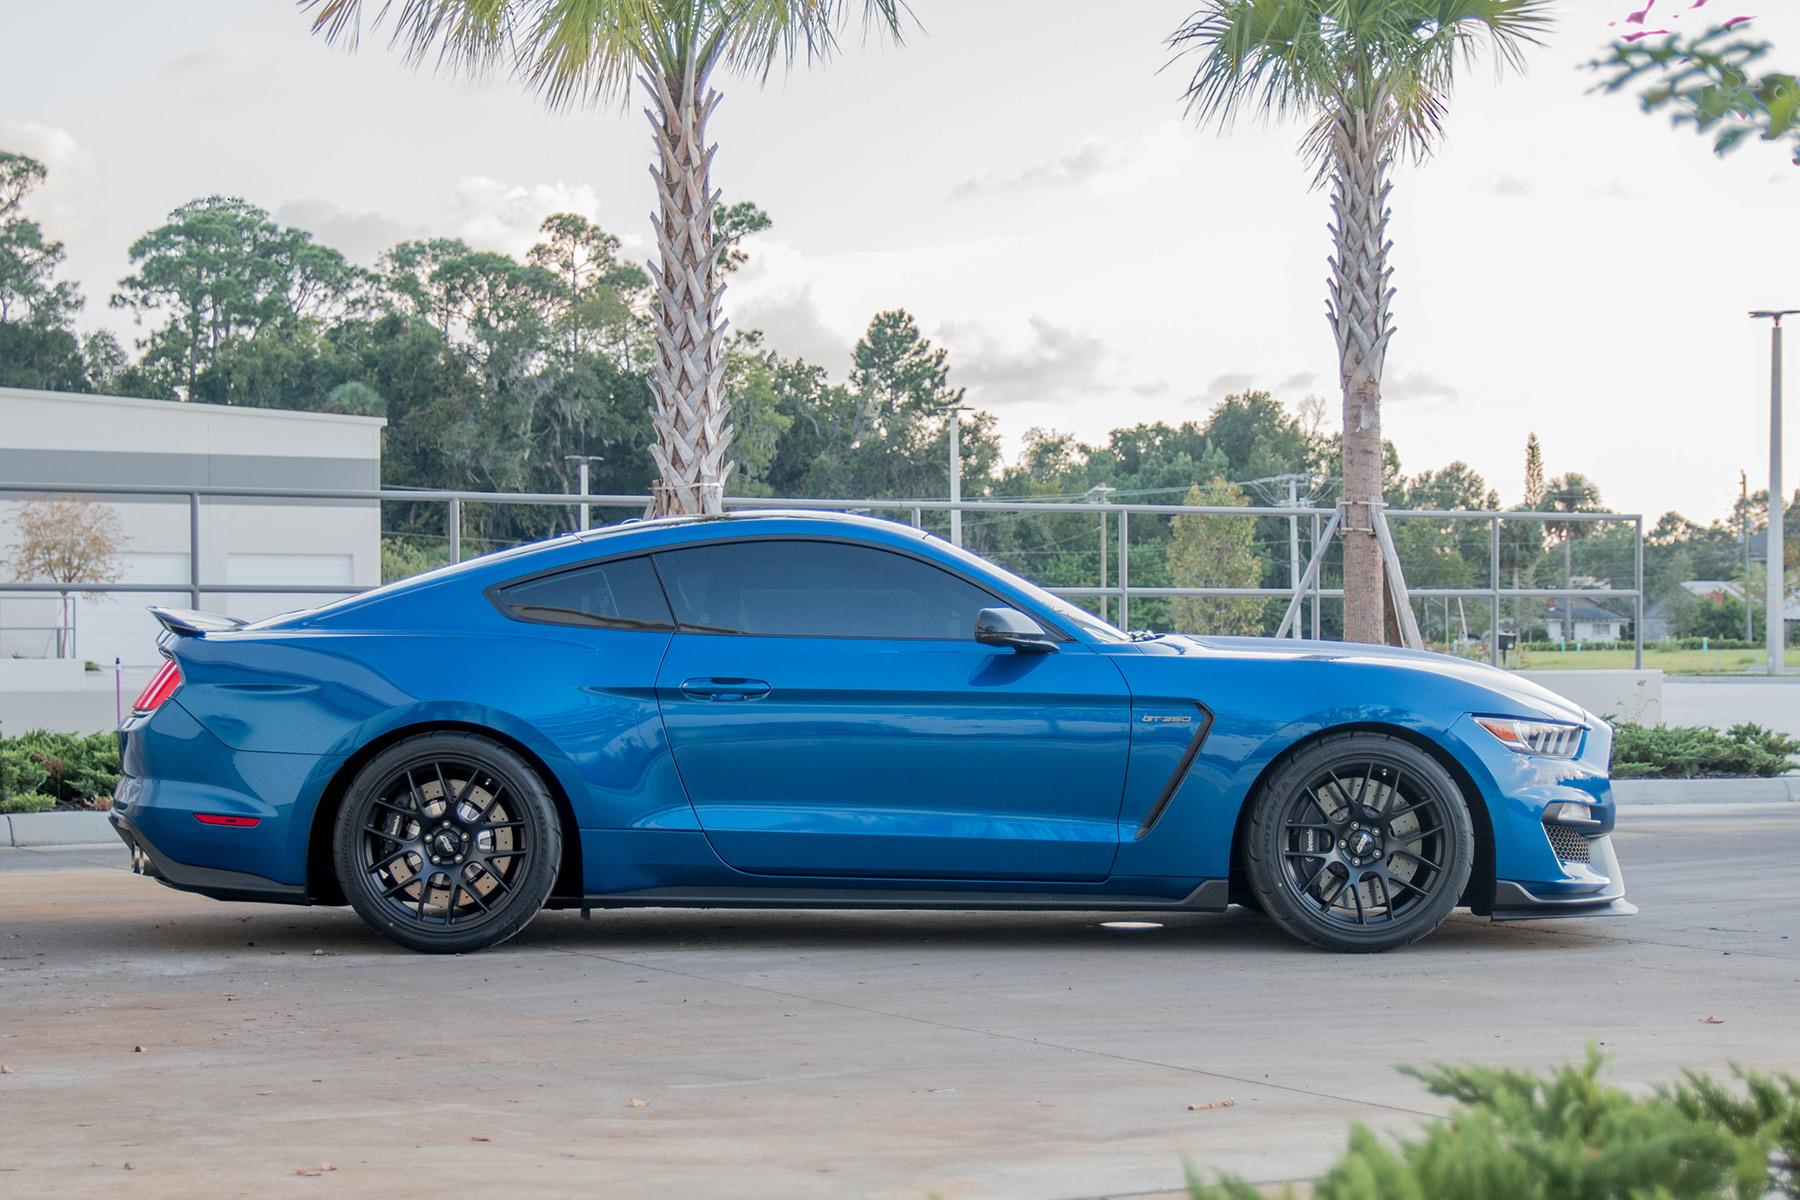 Ford S550 Mustang GT350 with 19" EC-7 in Satin Black